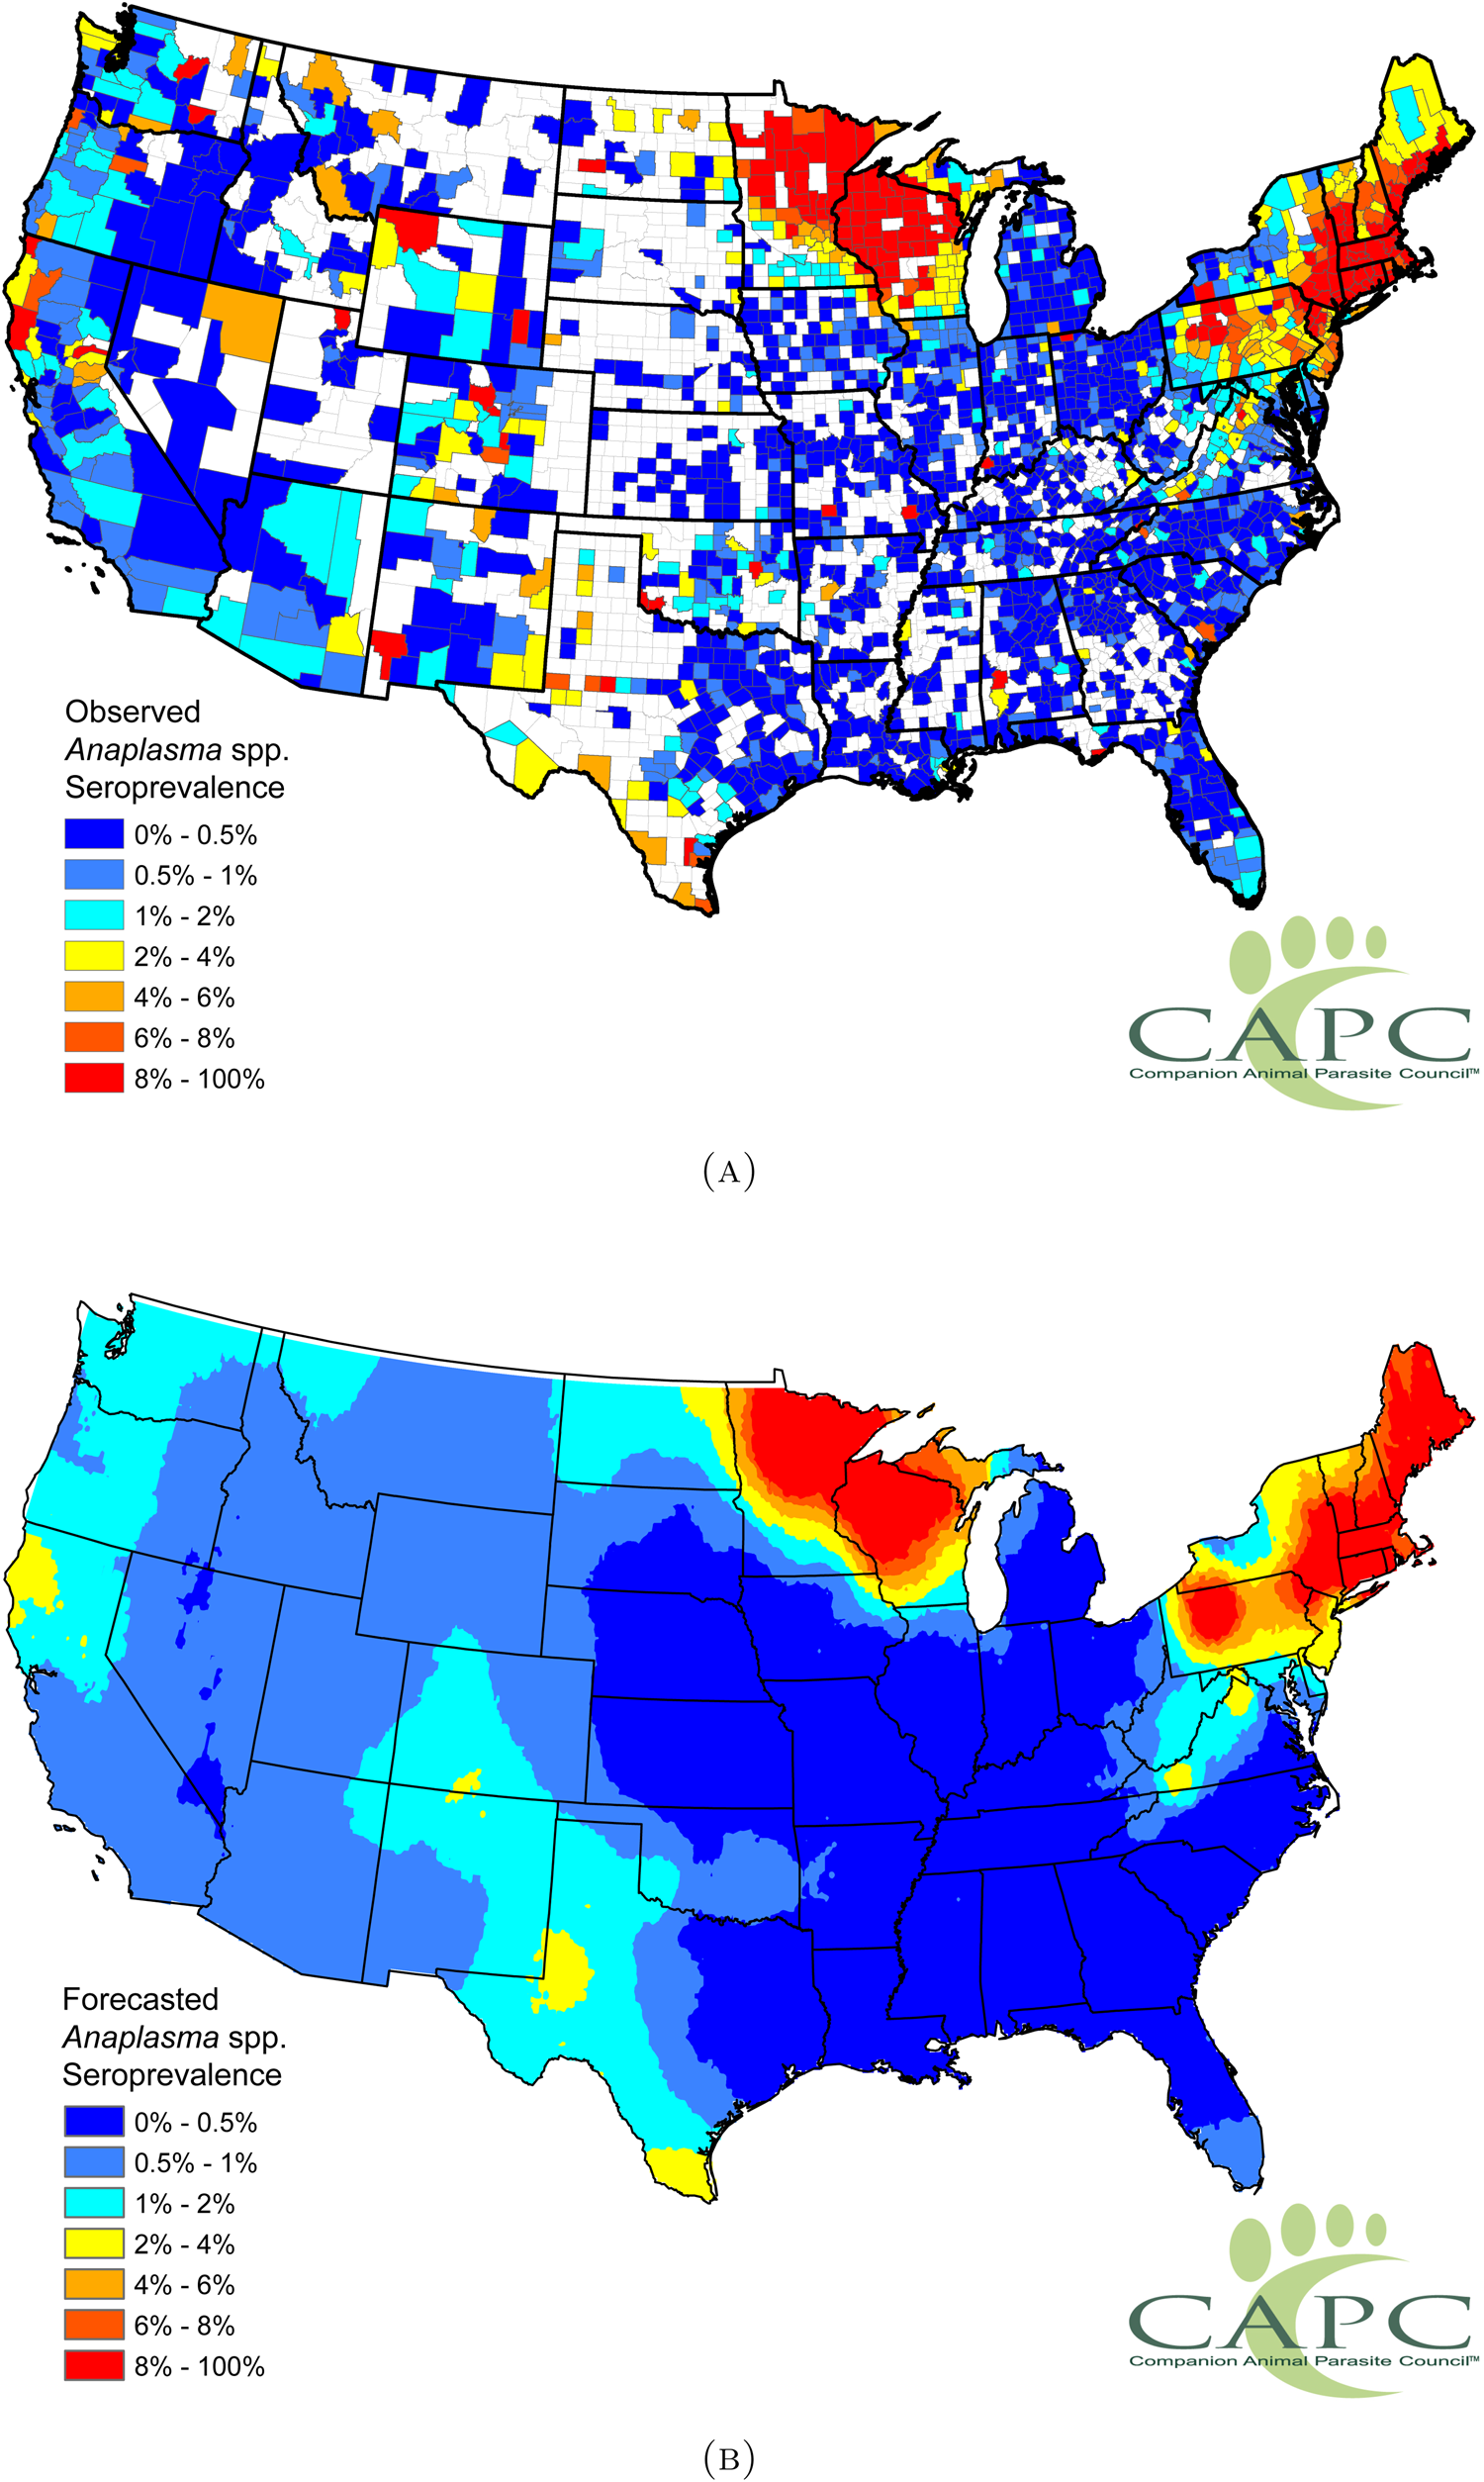 Canine vectorborne disease mapping and the accuracy of forecasting